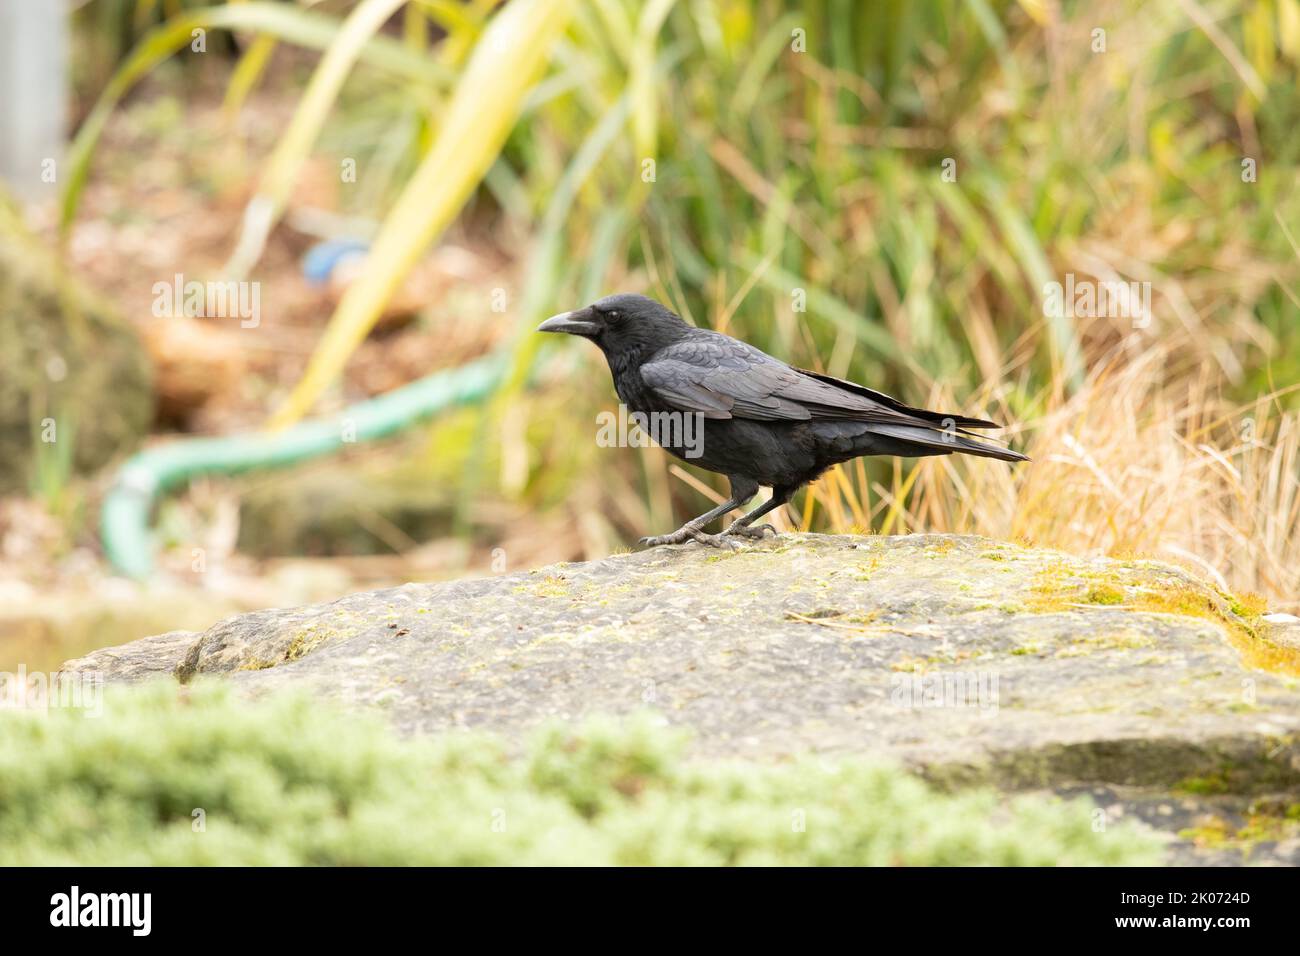 Carrion crow perched on a rock, corvid Stock Photo